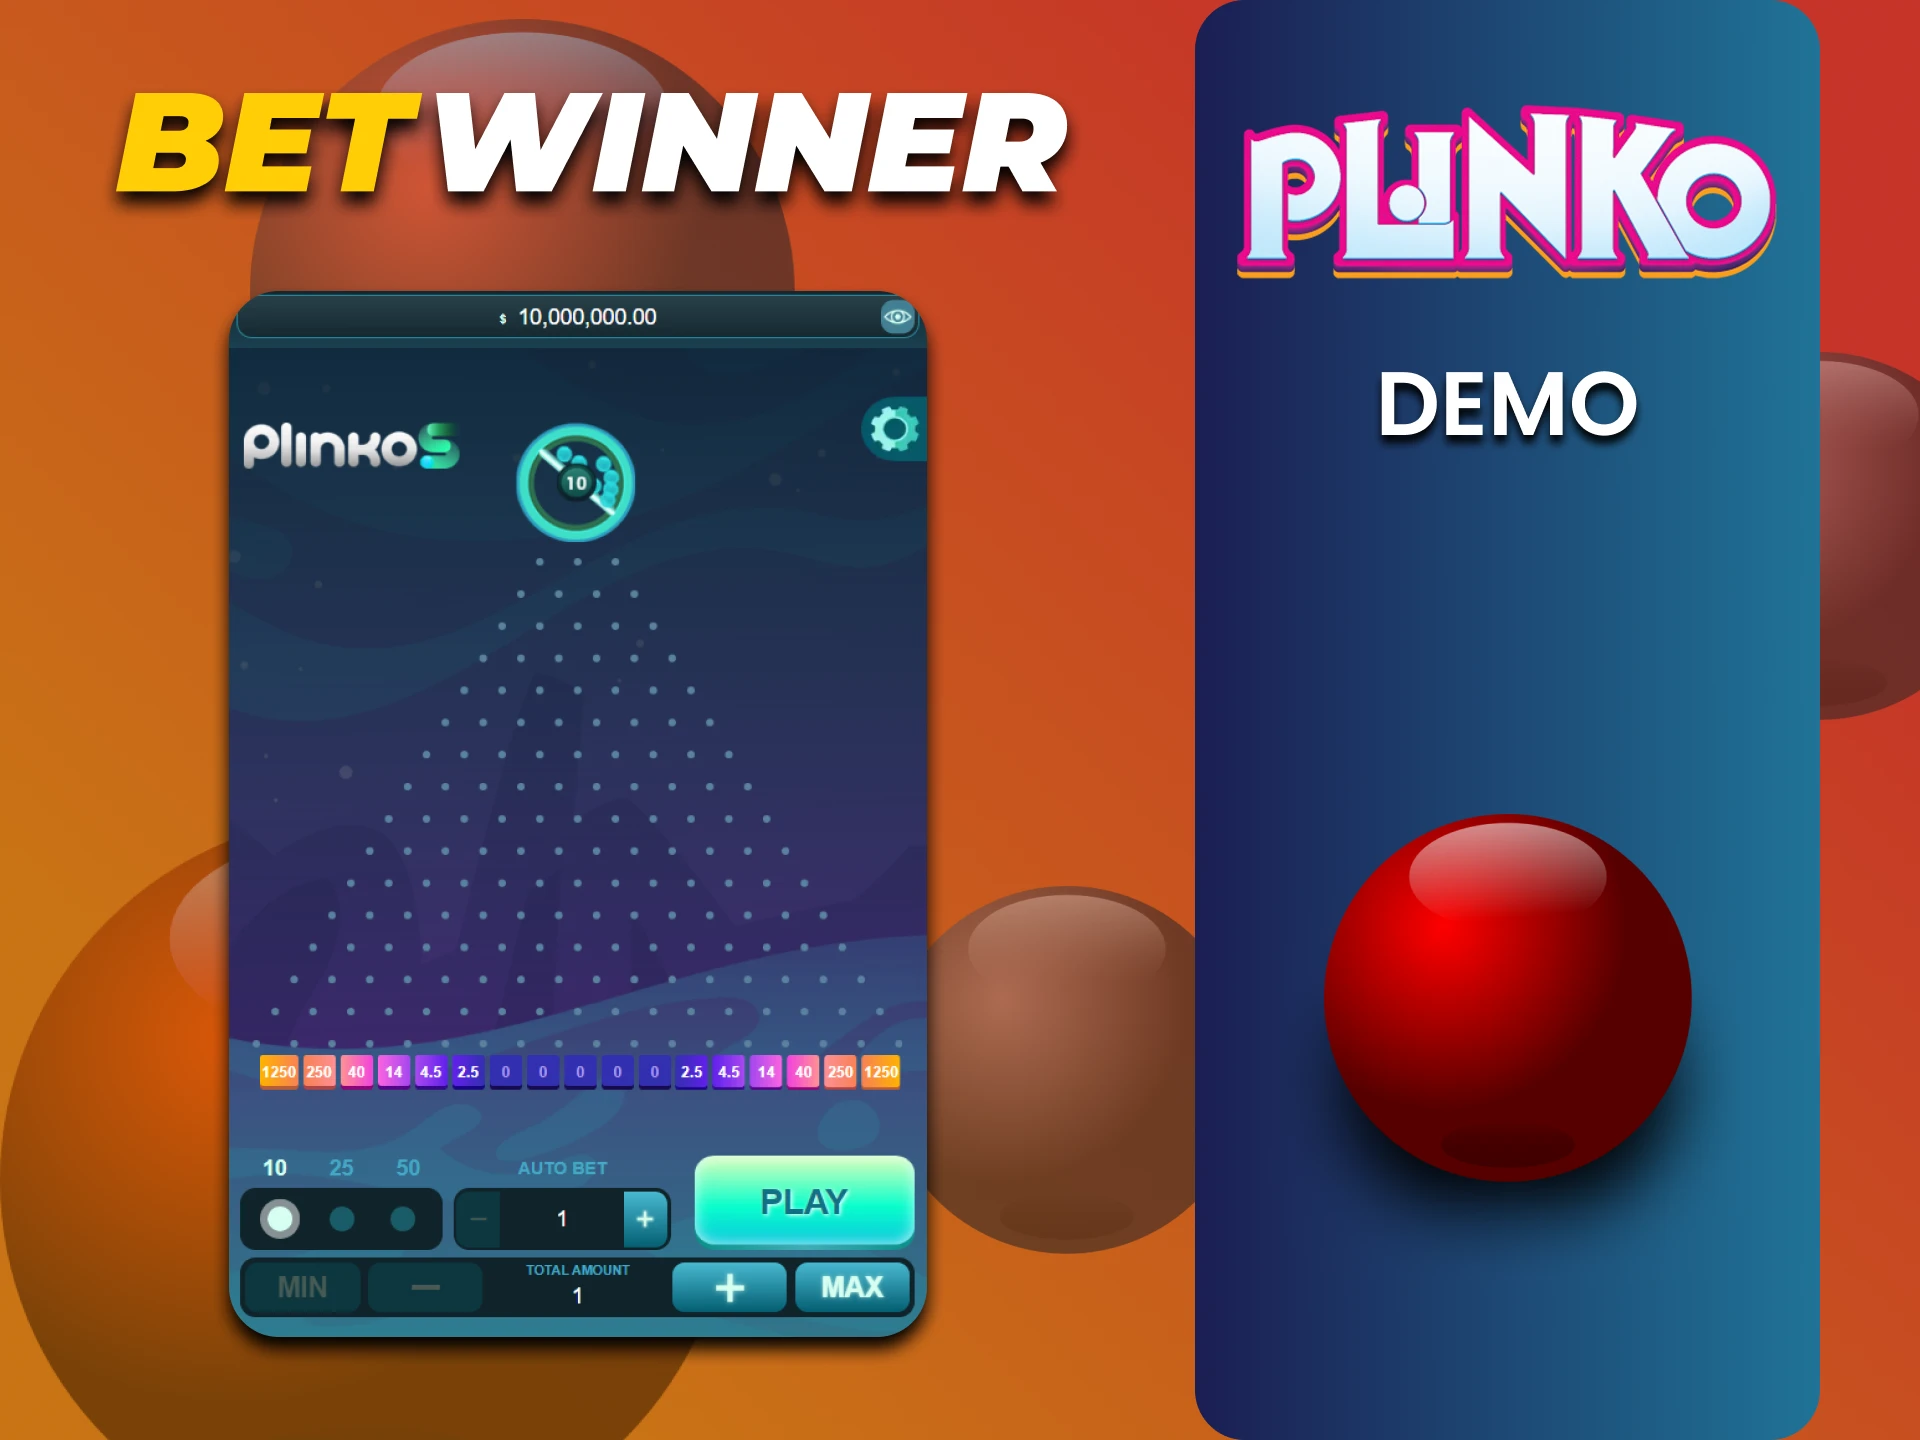 Train in a special version of the Plinko game at Betwinner.